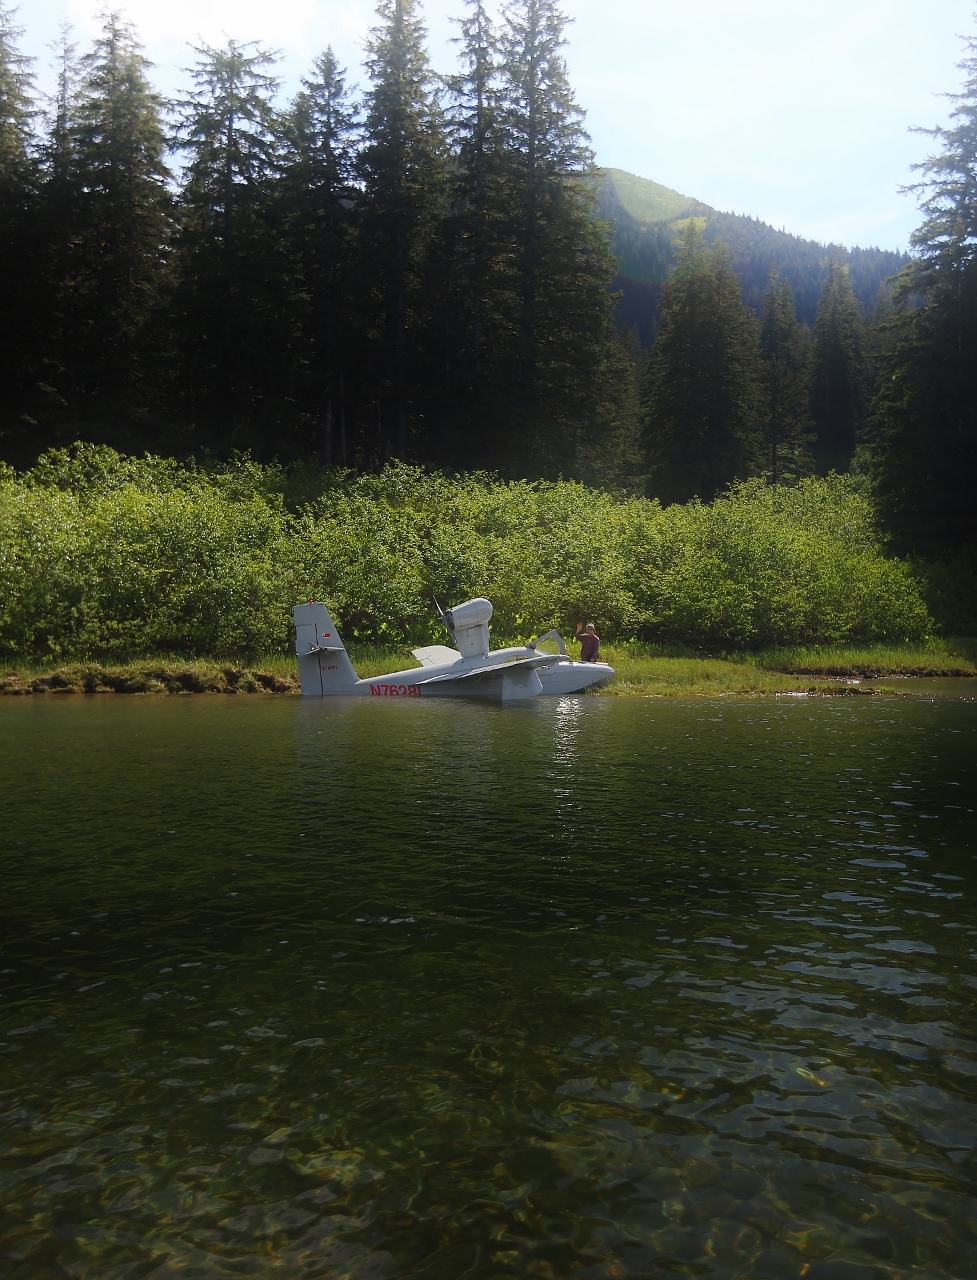 A small float plane.  The fellow set down in the wilderness to have a box lunch, then he'll be on his way, using the river as a runway.